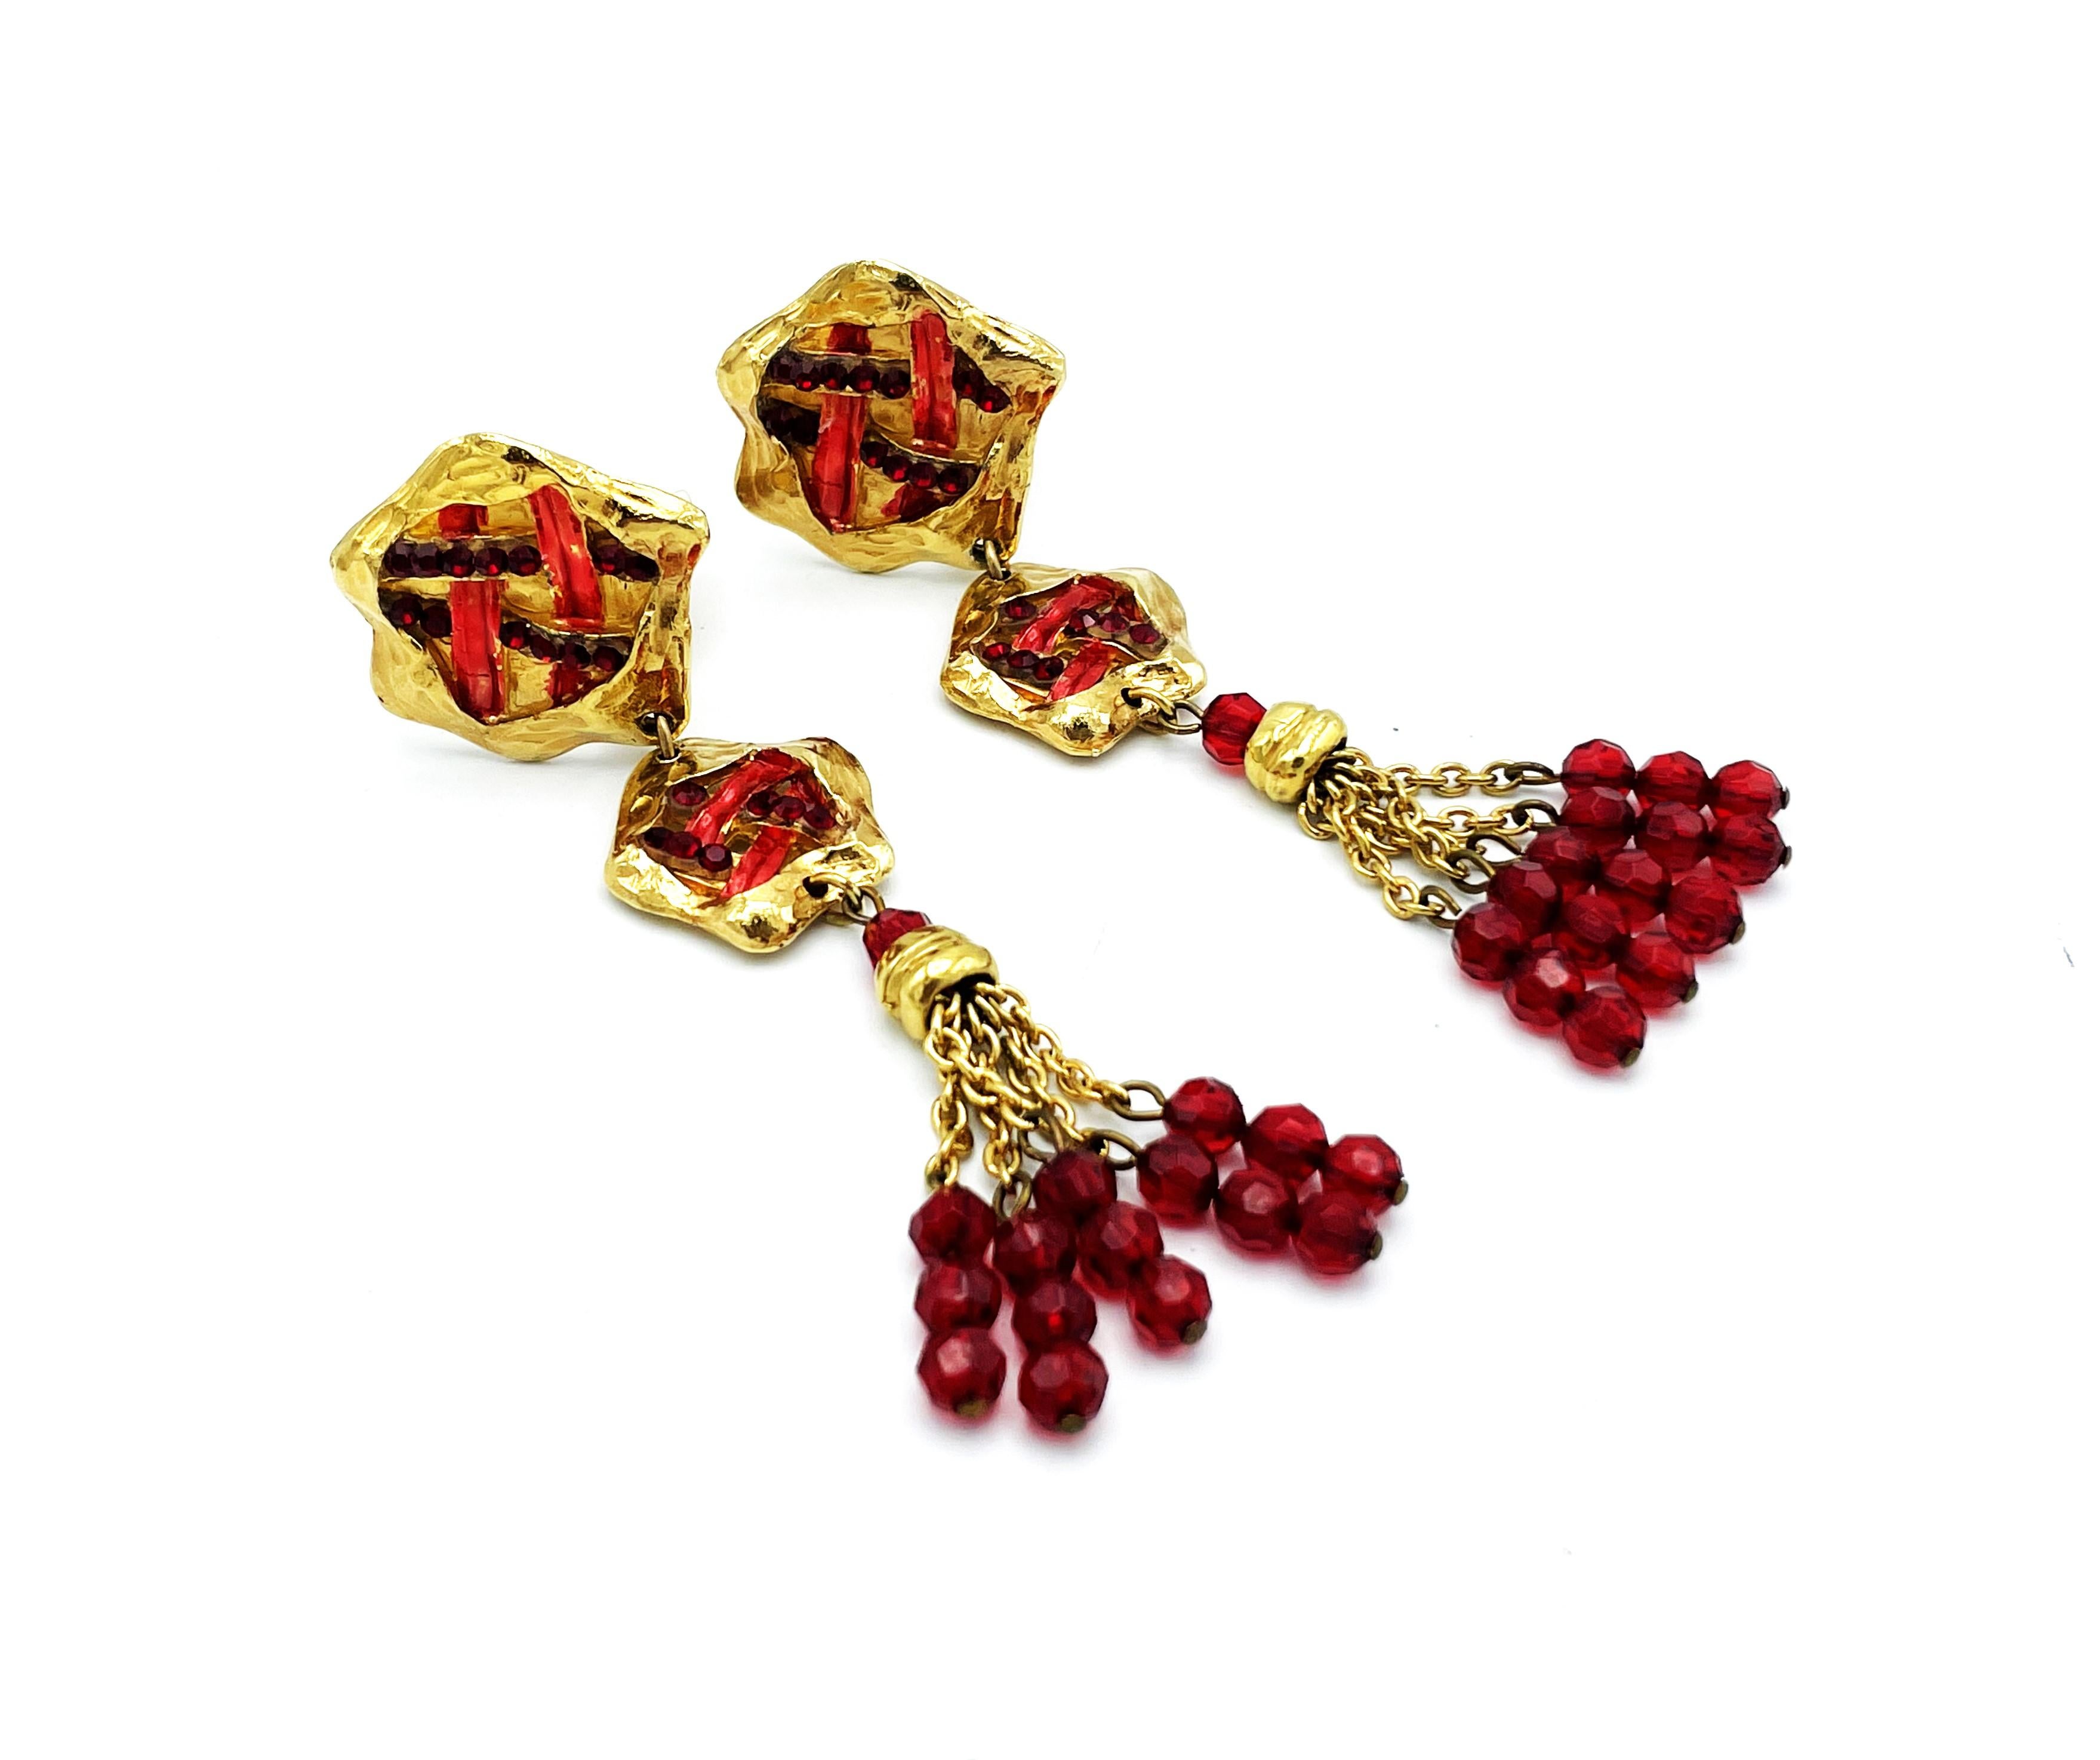 Women's Long Clip-one earing by JACKY de G Paris, gold plated, red rhinestons For Sale